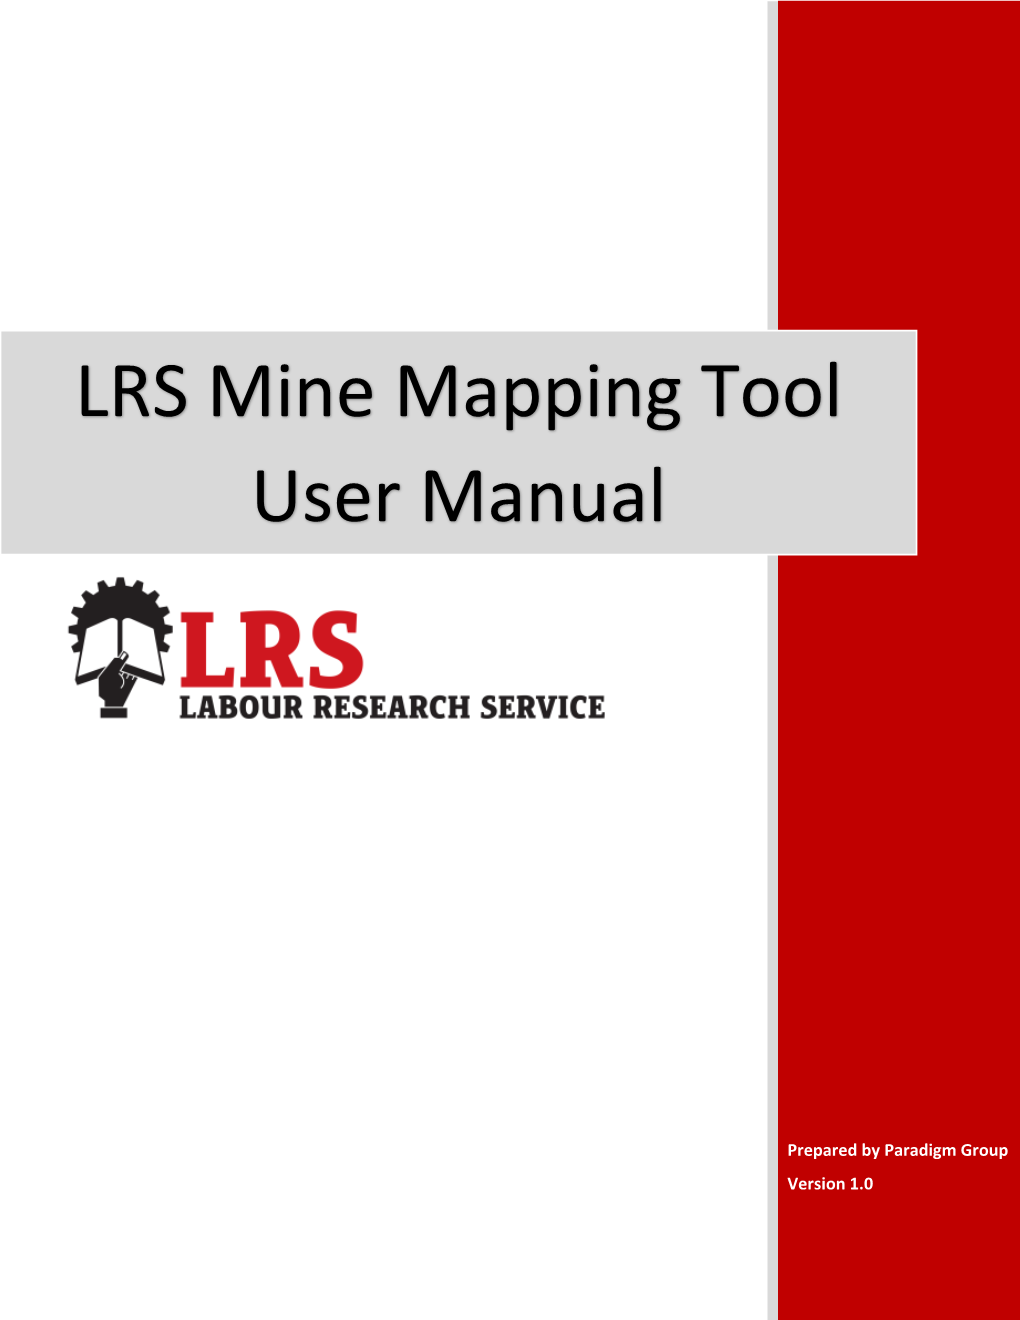 LRS Mine Mapping Tool User Manual